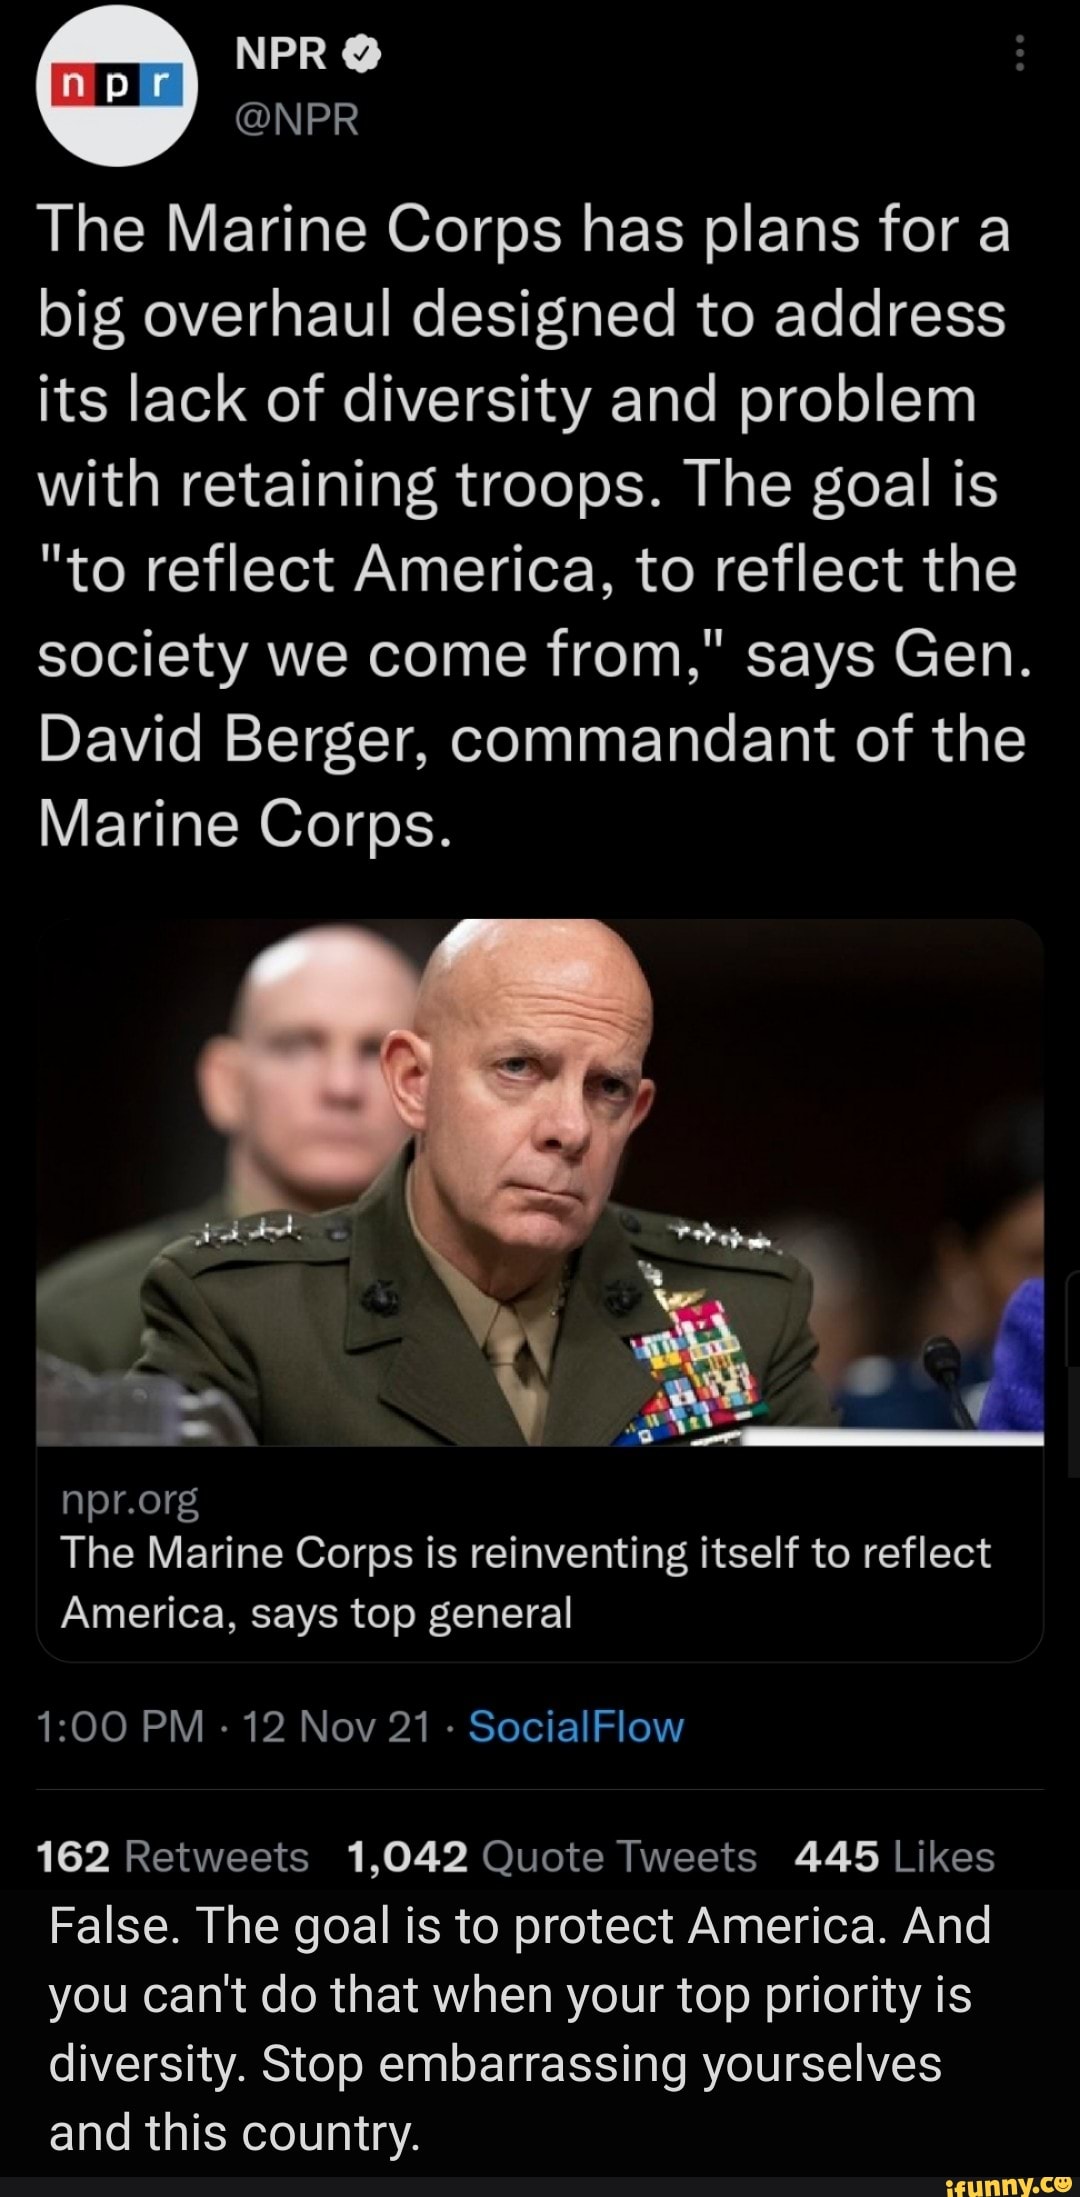 The Marine Corps is reinventing itself to reflect America, says top general  : NPR